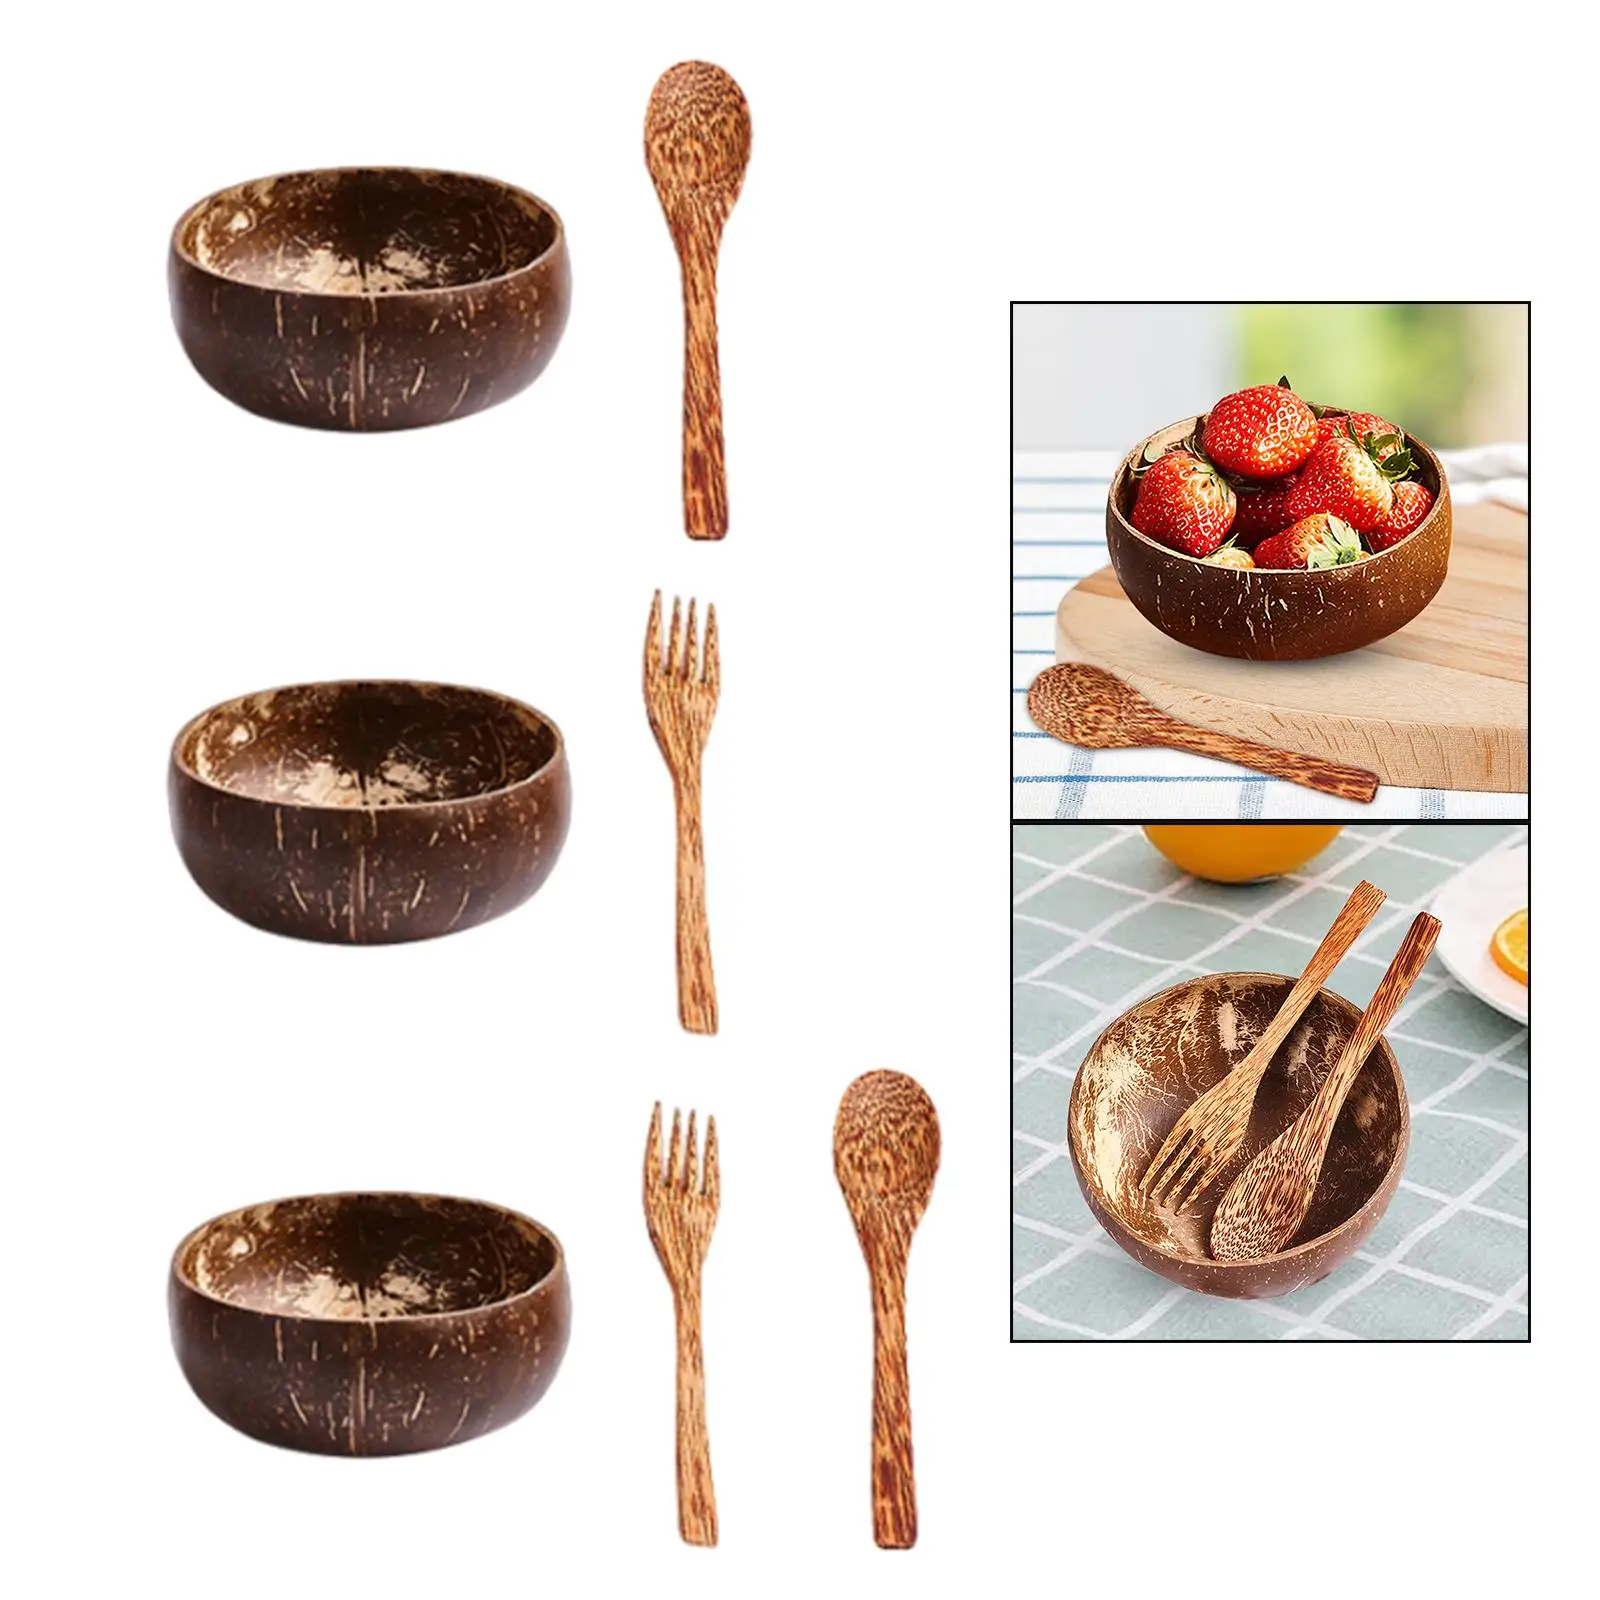 Coconut Bowl Set Portable Household Storage Bowls Stylish Handcrafted Coconut Shell Bowl for Hotel Indoor Camping Kitchen Rice